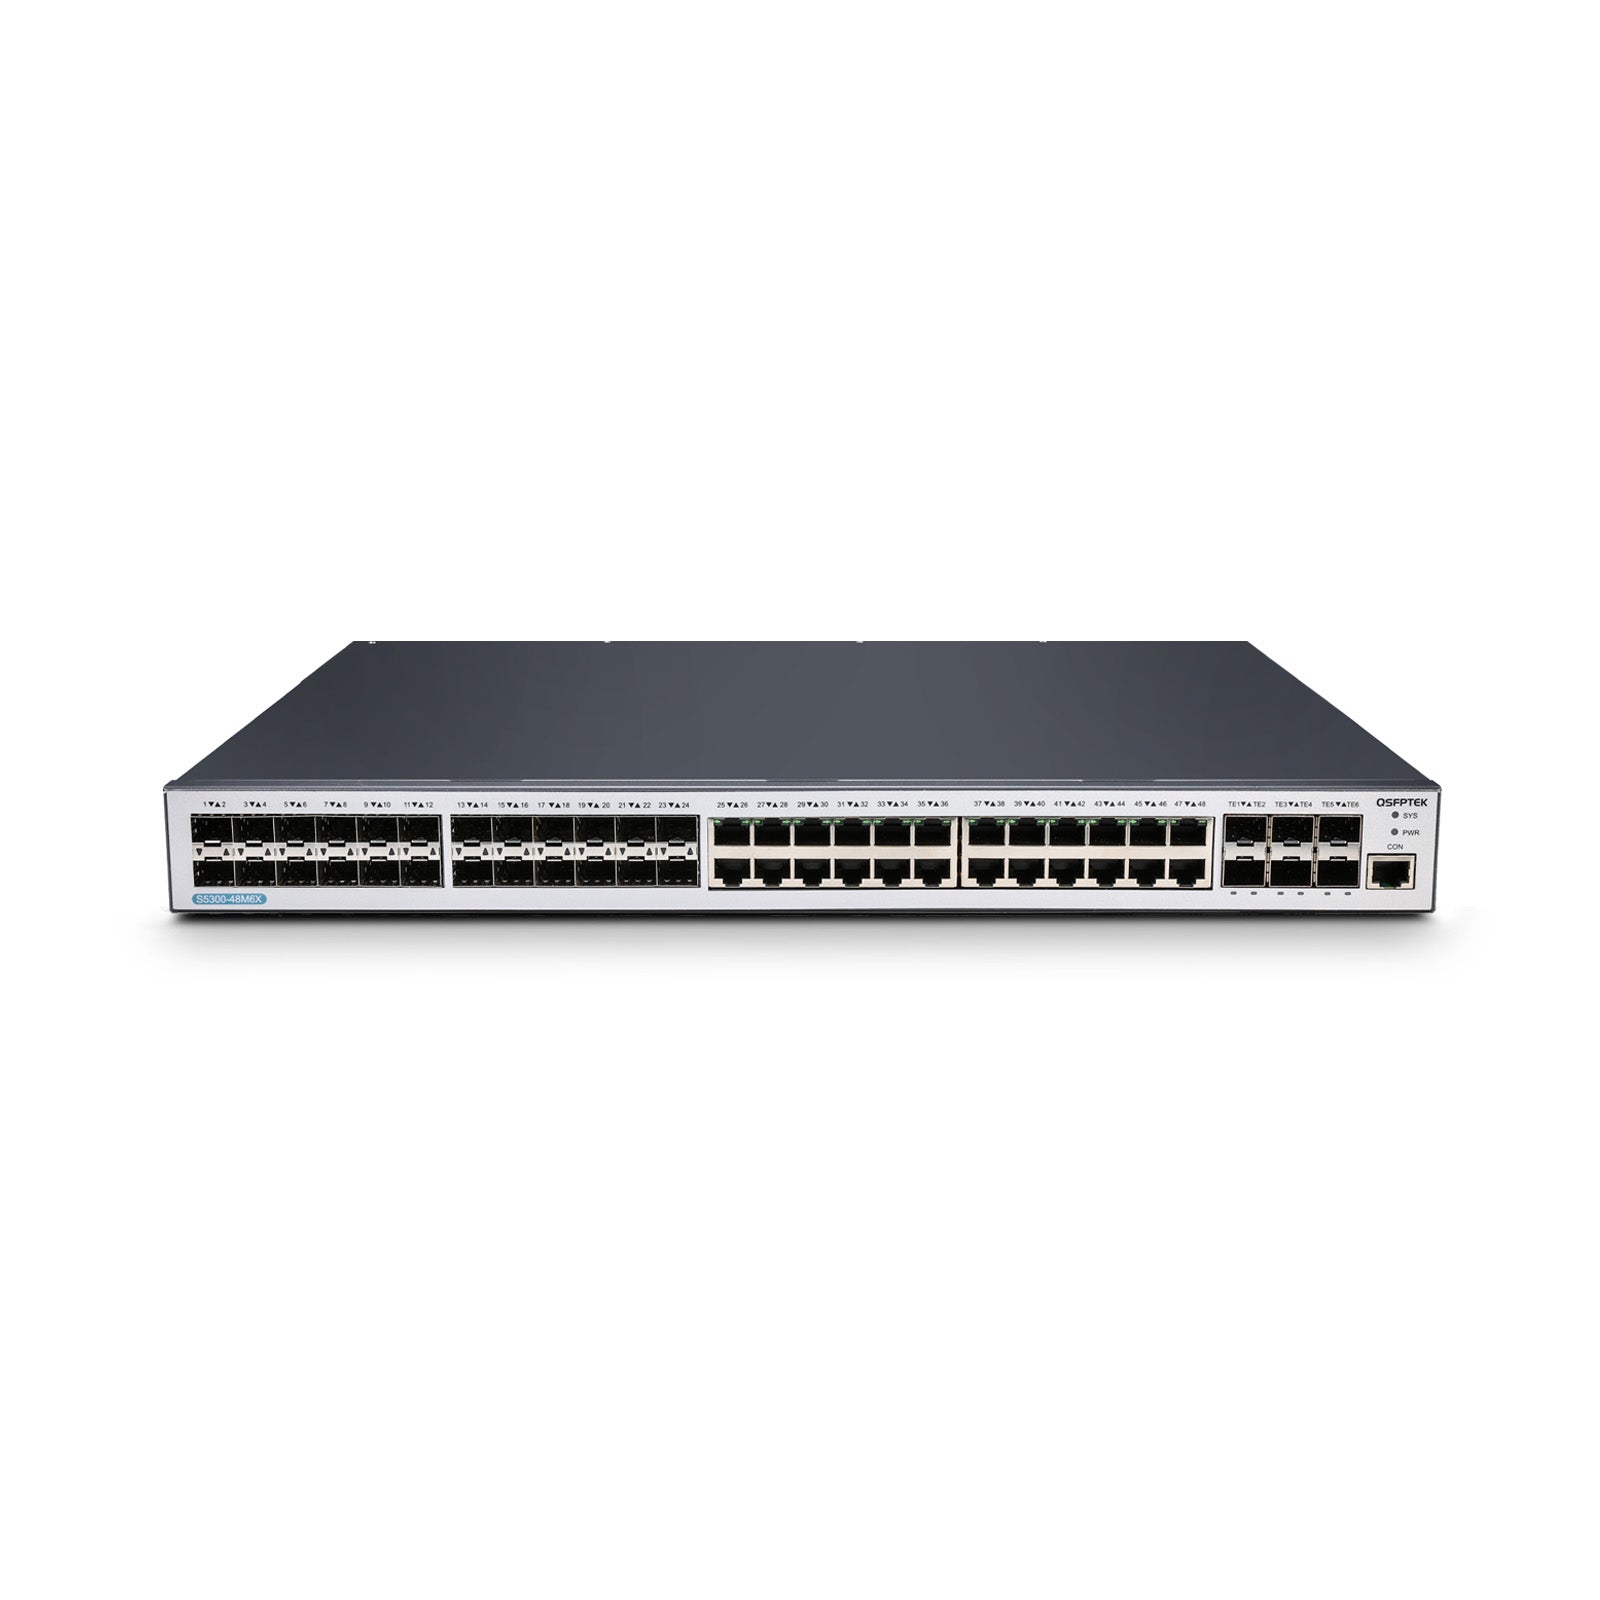 S5300-48M6X, 48-Port Ethernet L3 Switch, 24x GE RJ45 Ports, 24x GE SFP Ports with 6x 10GE SFP+ Uplink, Stackable Switch